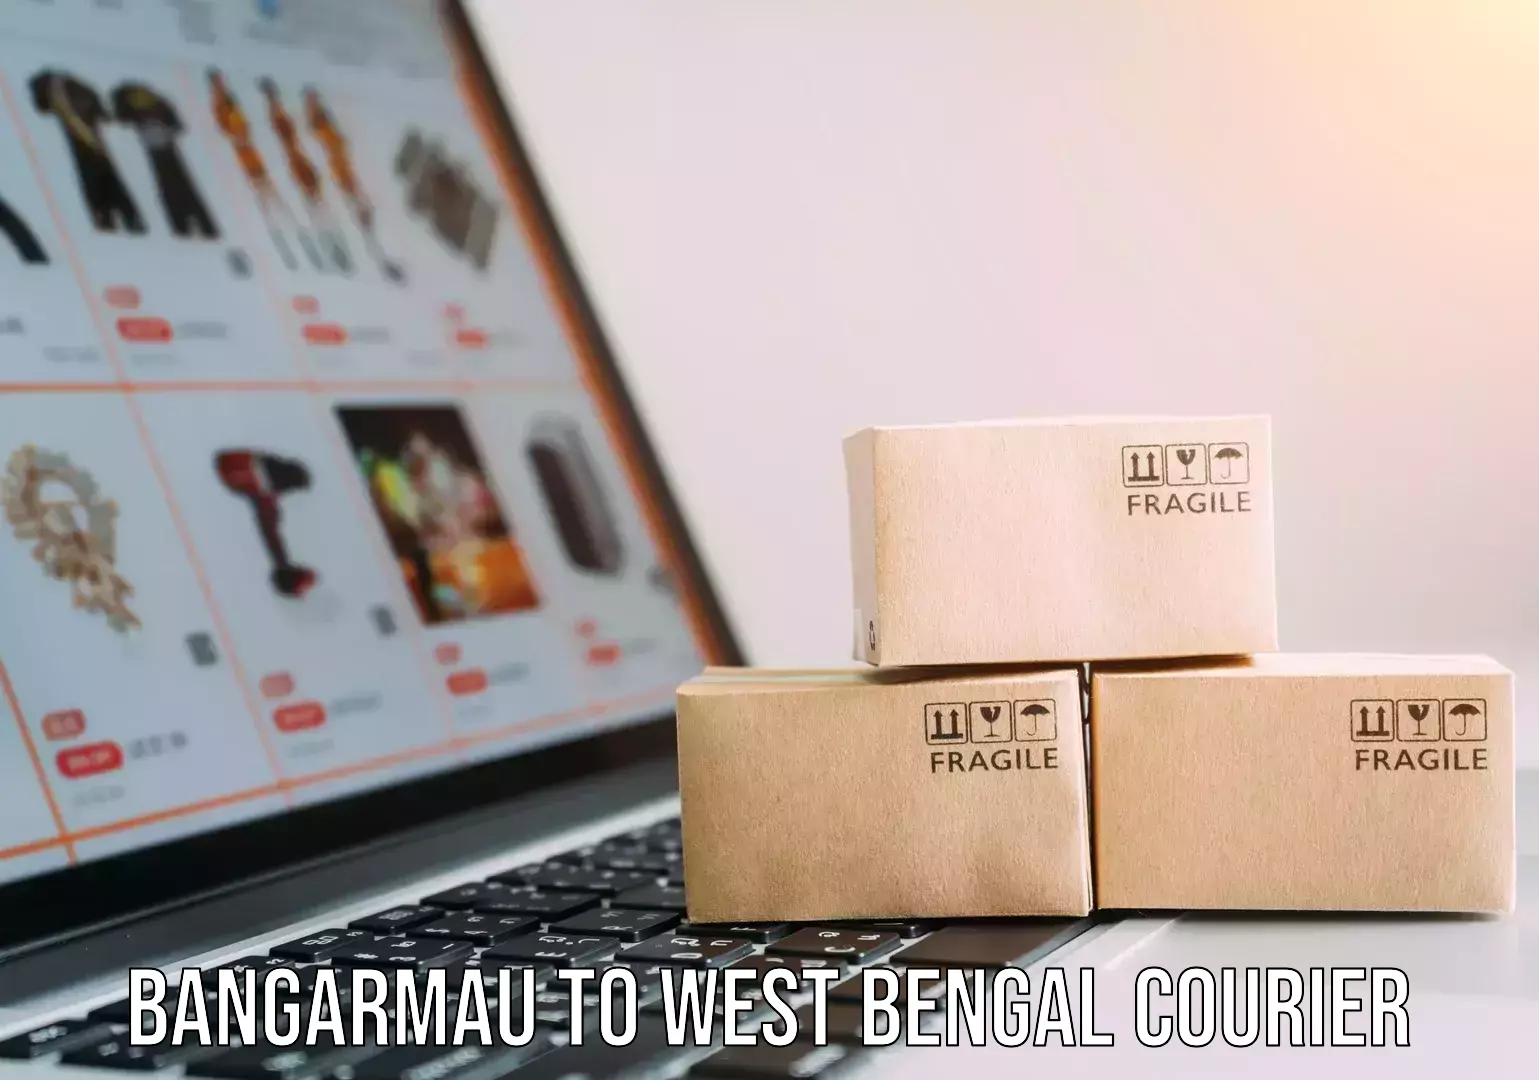 Global shipping solutions Bangarmau to West Bengal